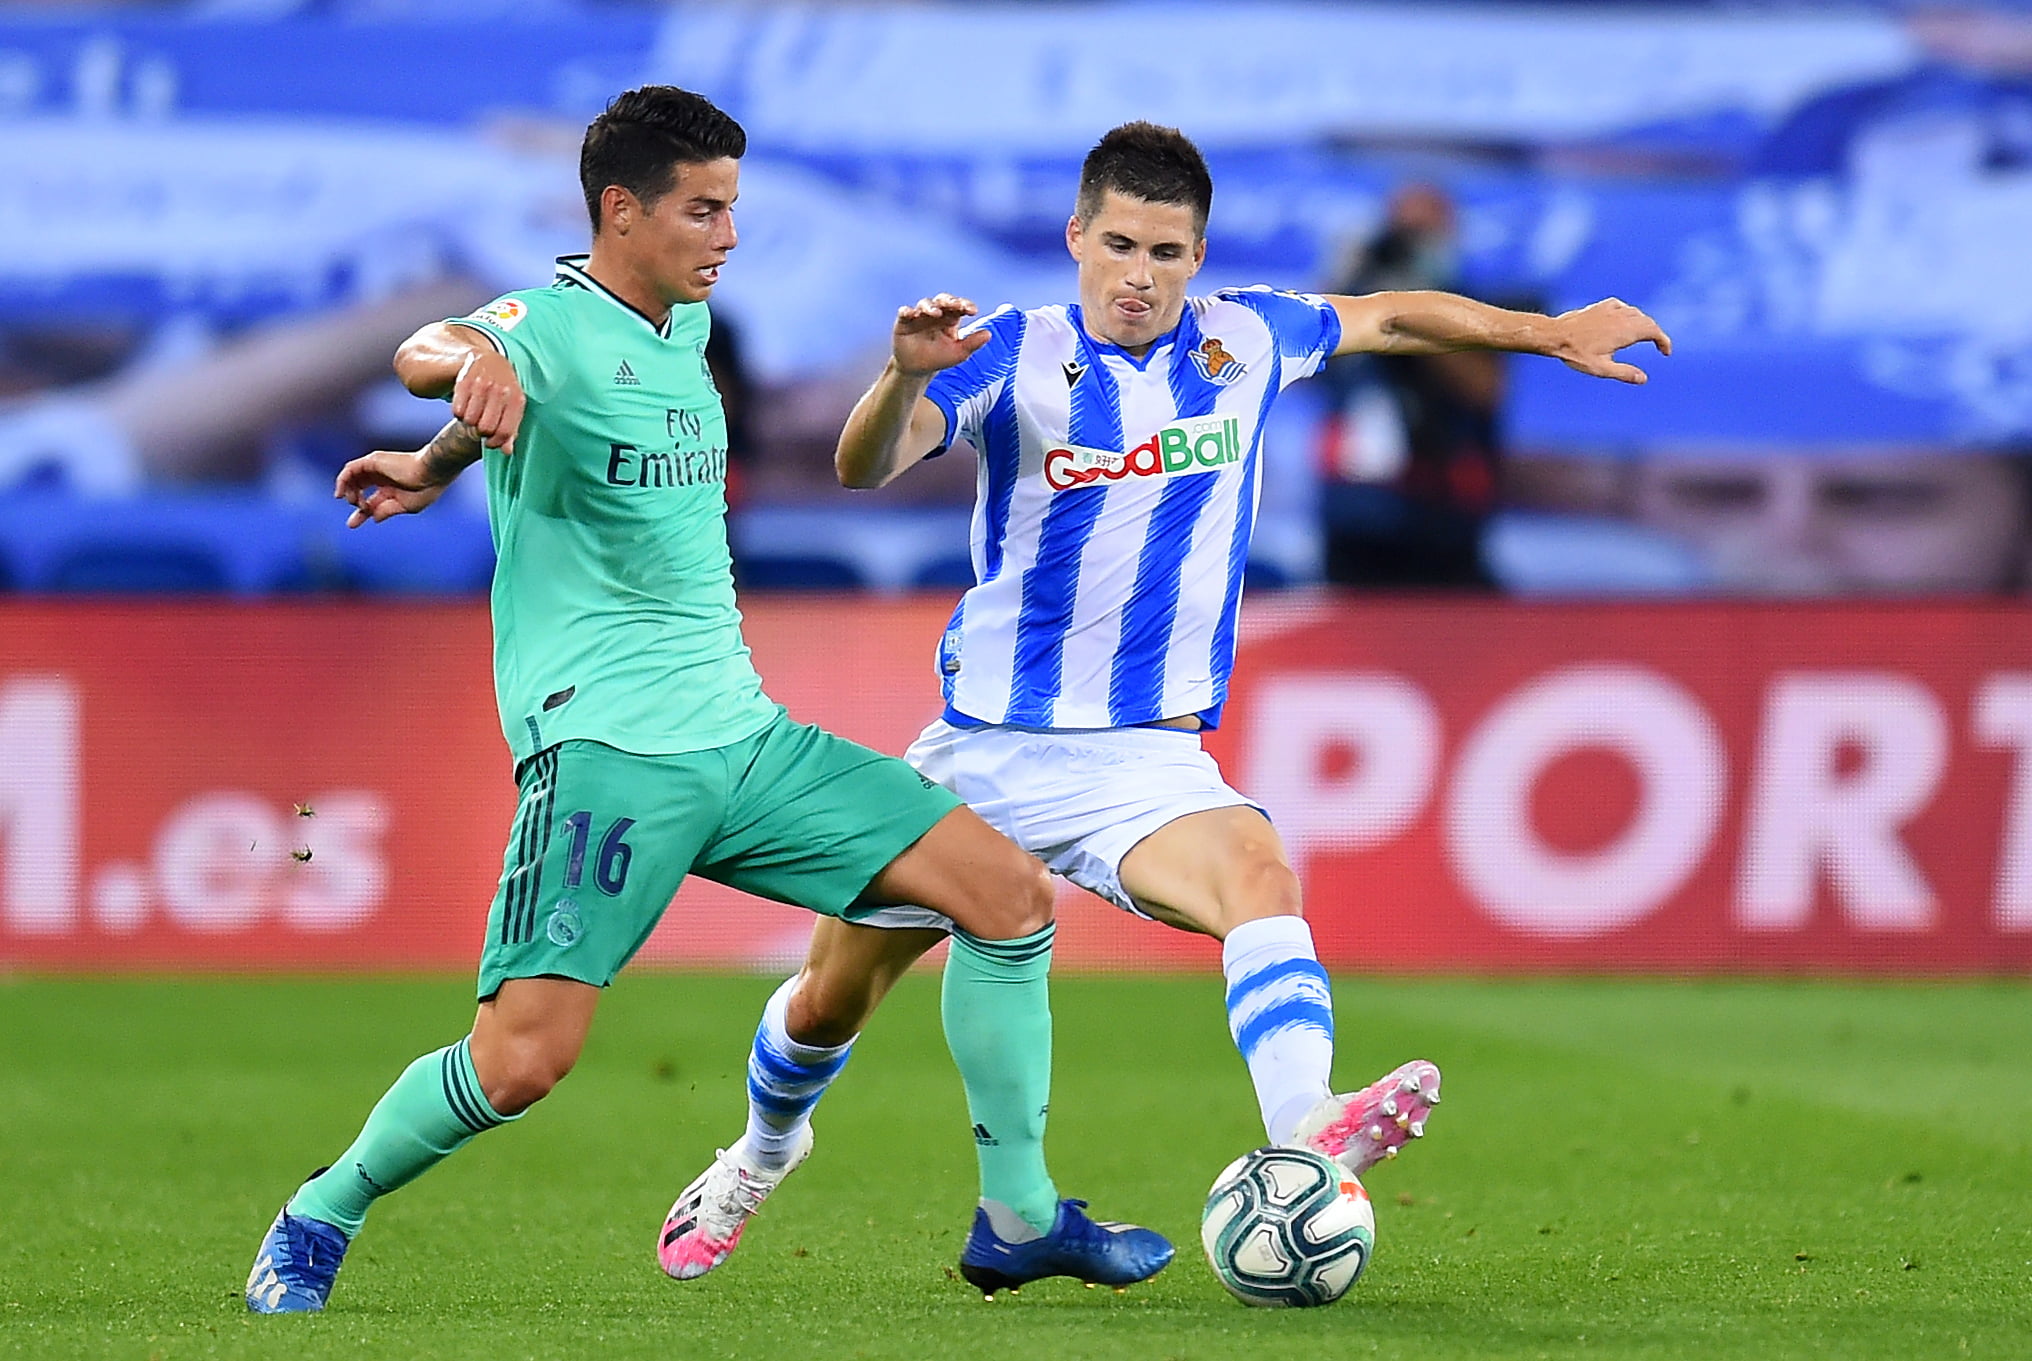 Real Madrid's Rodriguez set for a summer move to Everton (Rodriguez is in action in the picture)